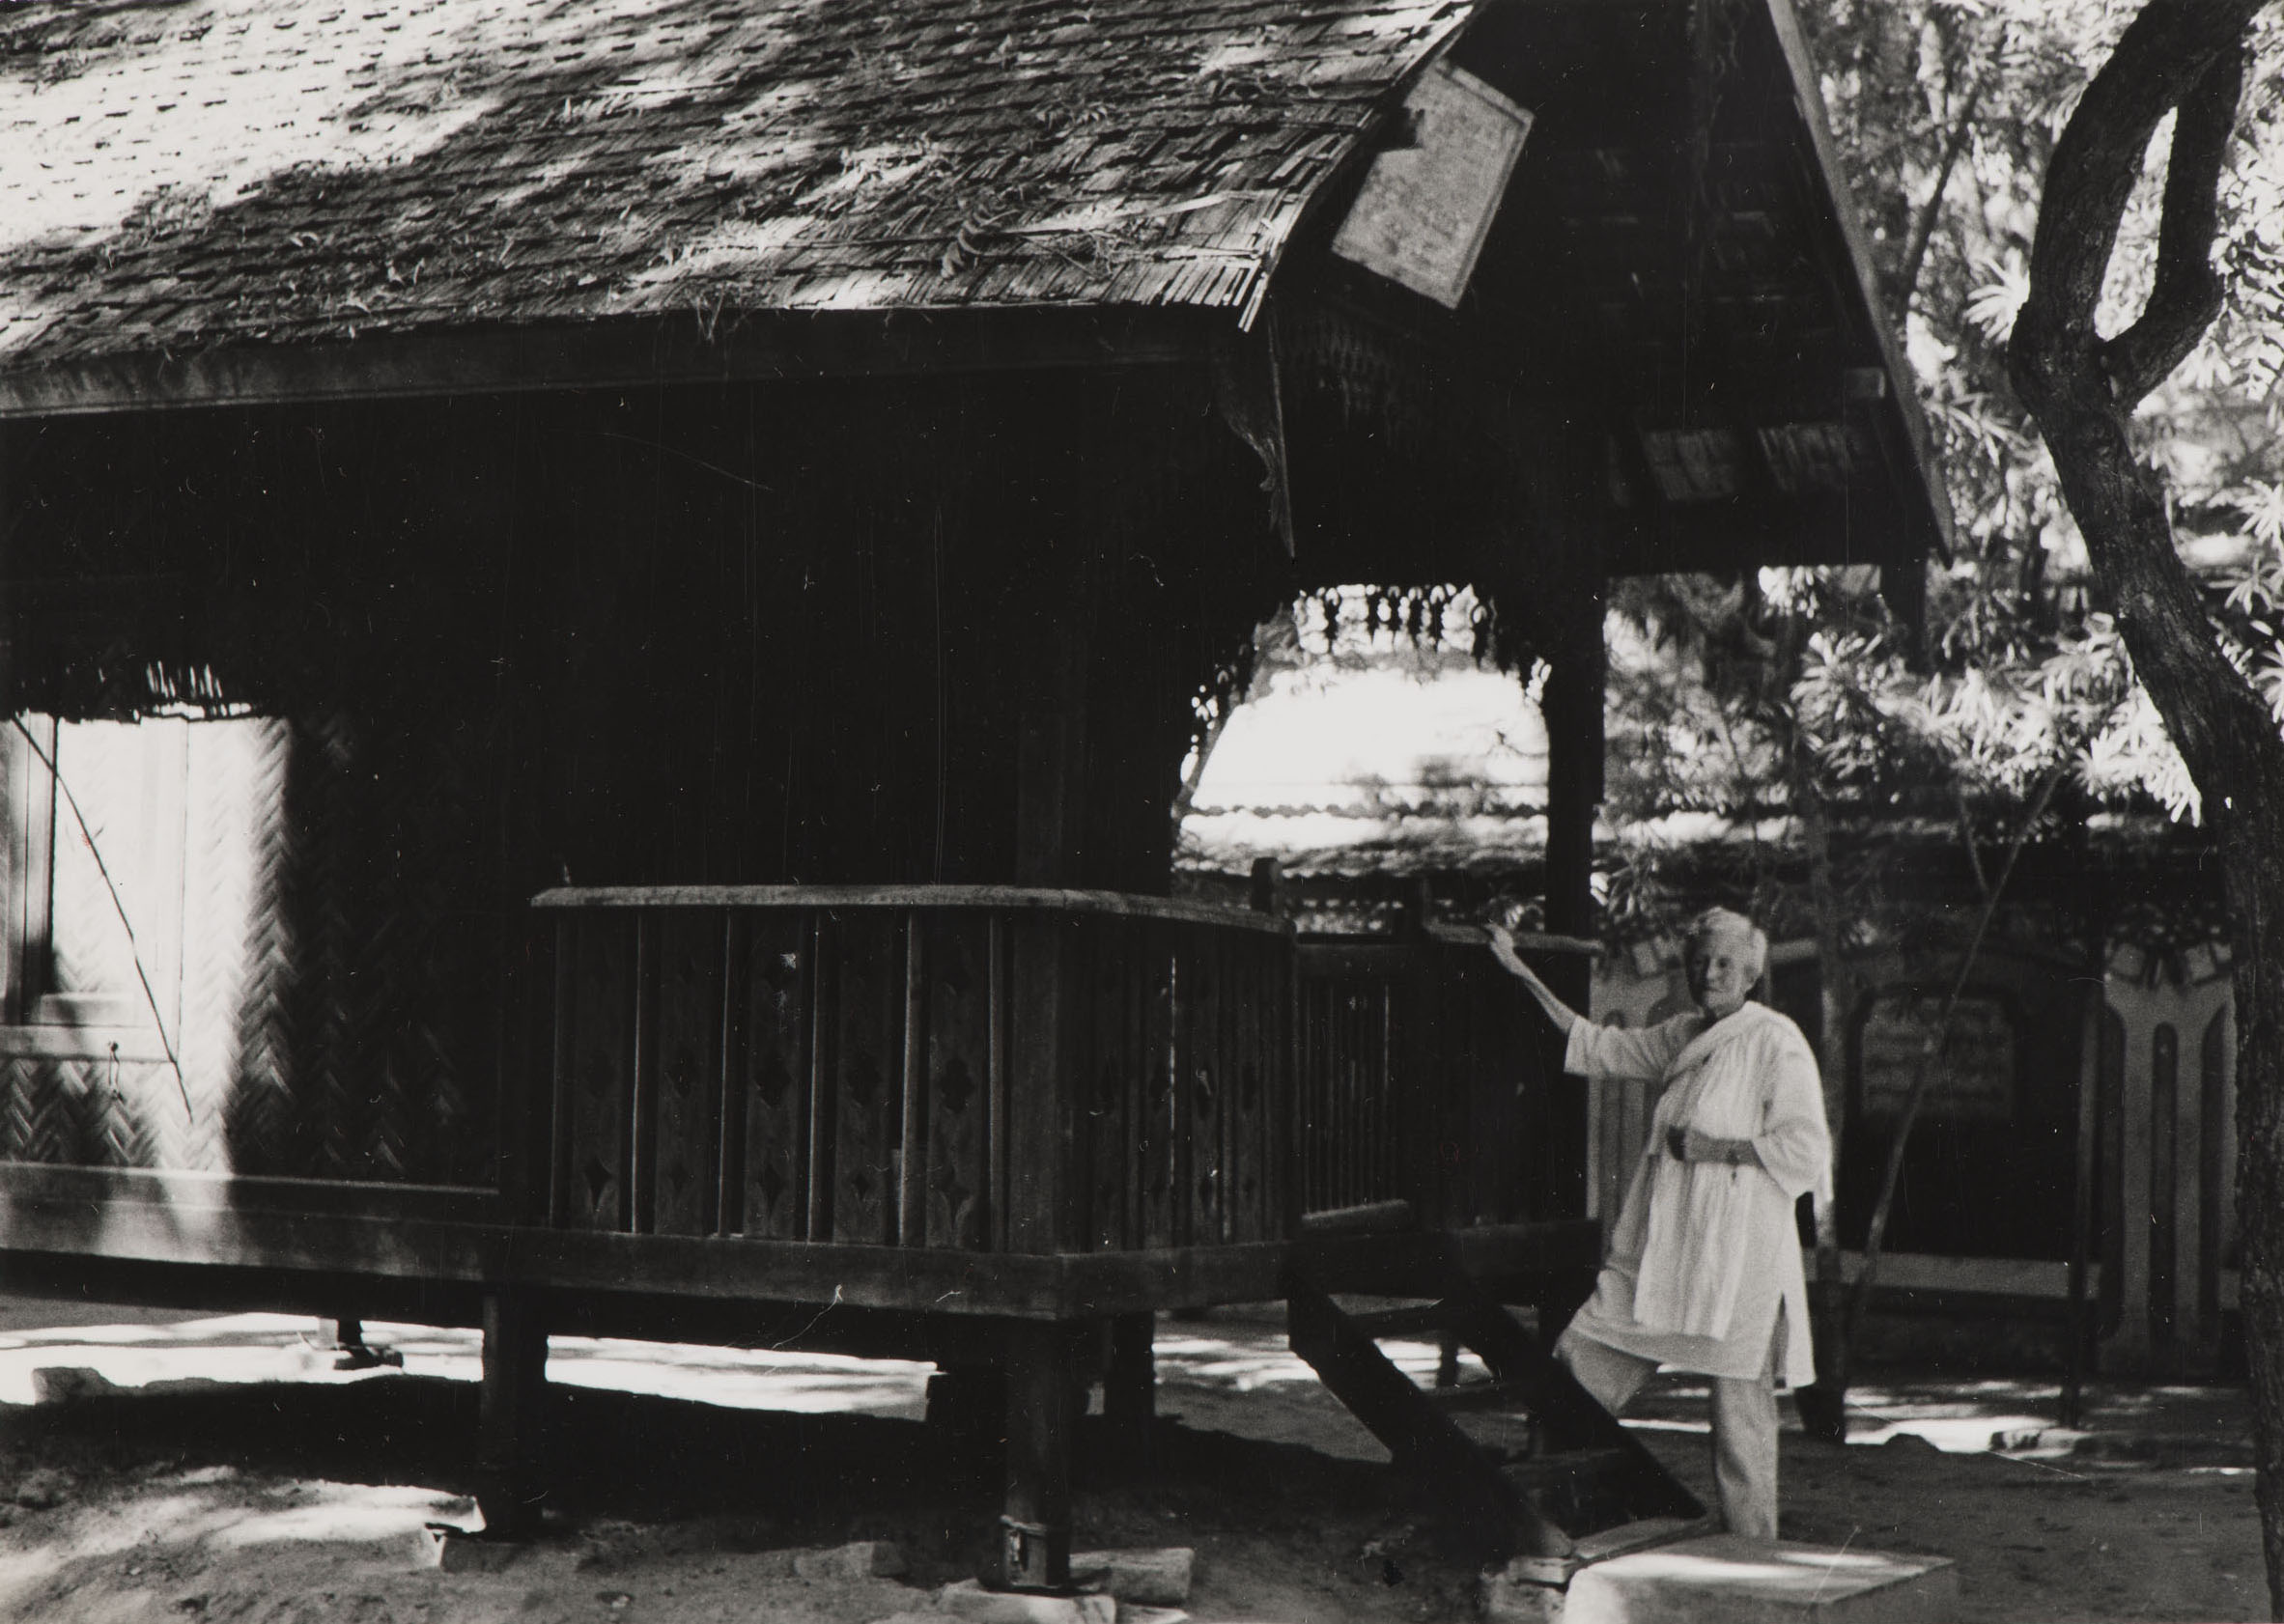 A black and white photograph of an older woman standing next to a hut, resting her hand on the banister.